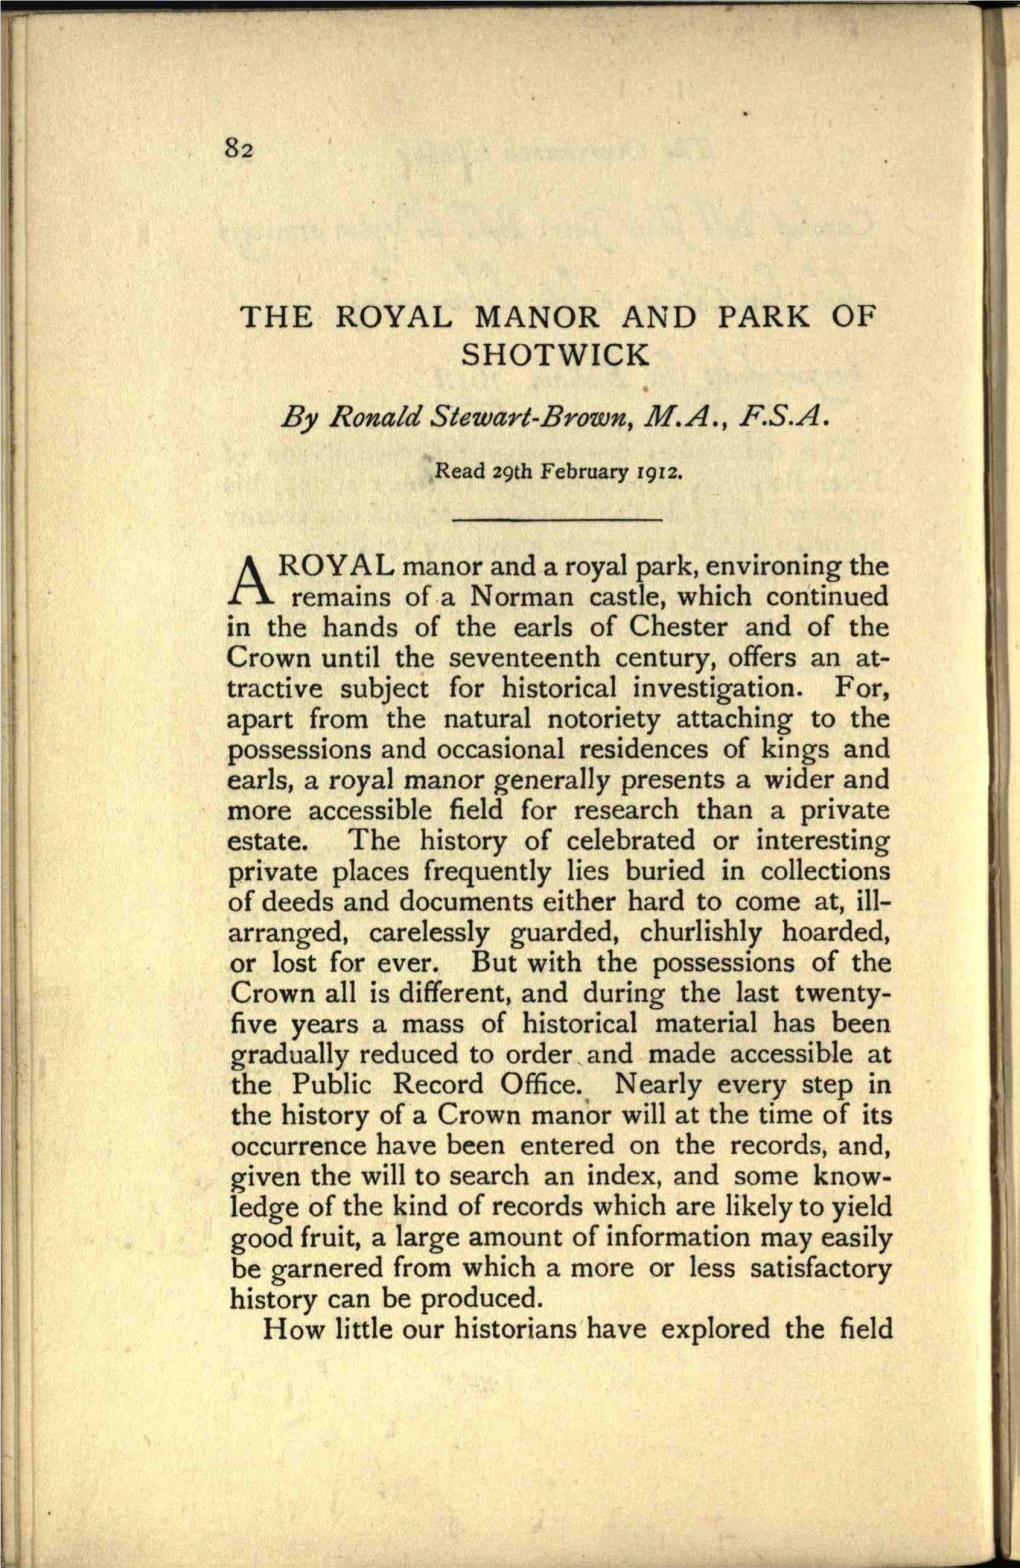 THE ROYAL MANOR and PARK of SHOTWICK by Ronald Stewart-Brown, M.A., F.S.A